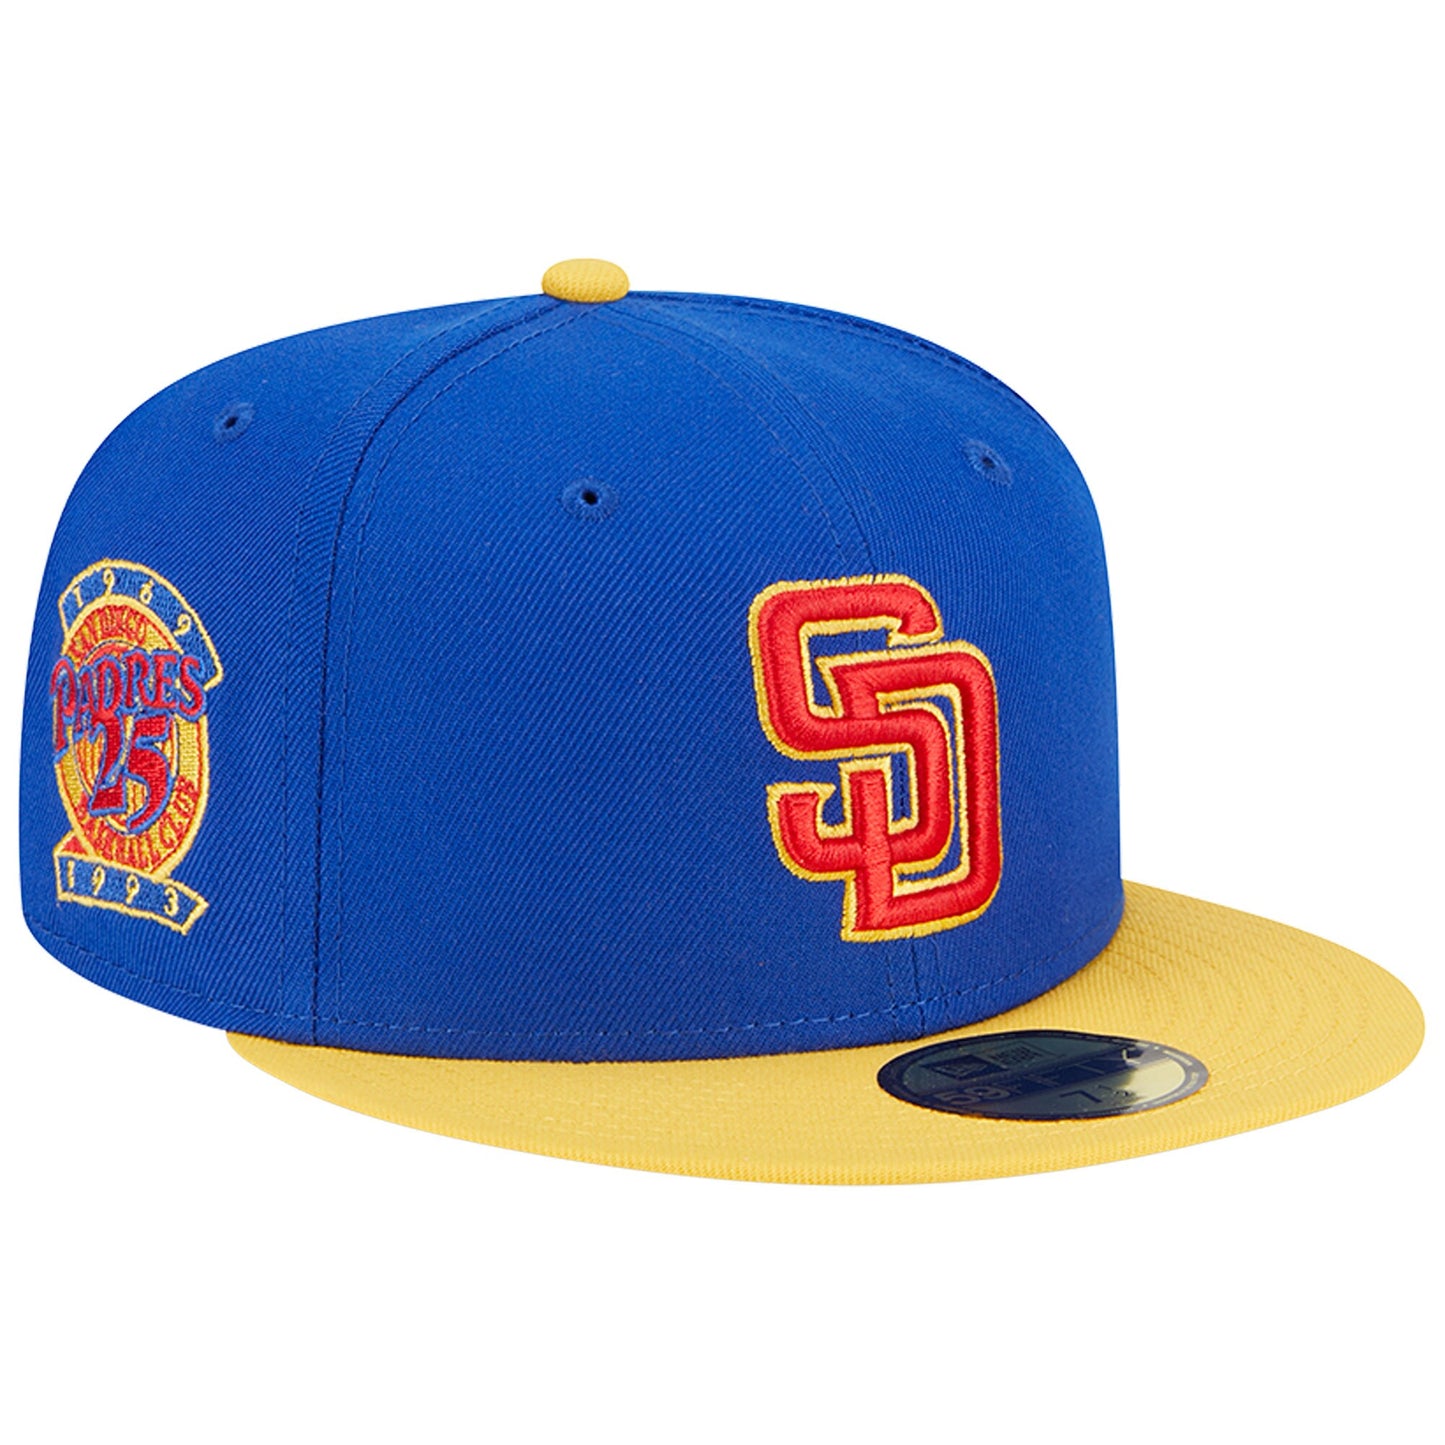 San Diego Padres New Era Empire 59FIFTY Fitted Hat - Royal/Yellow